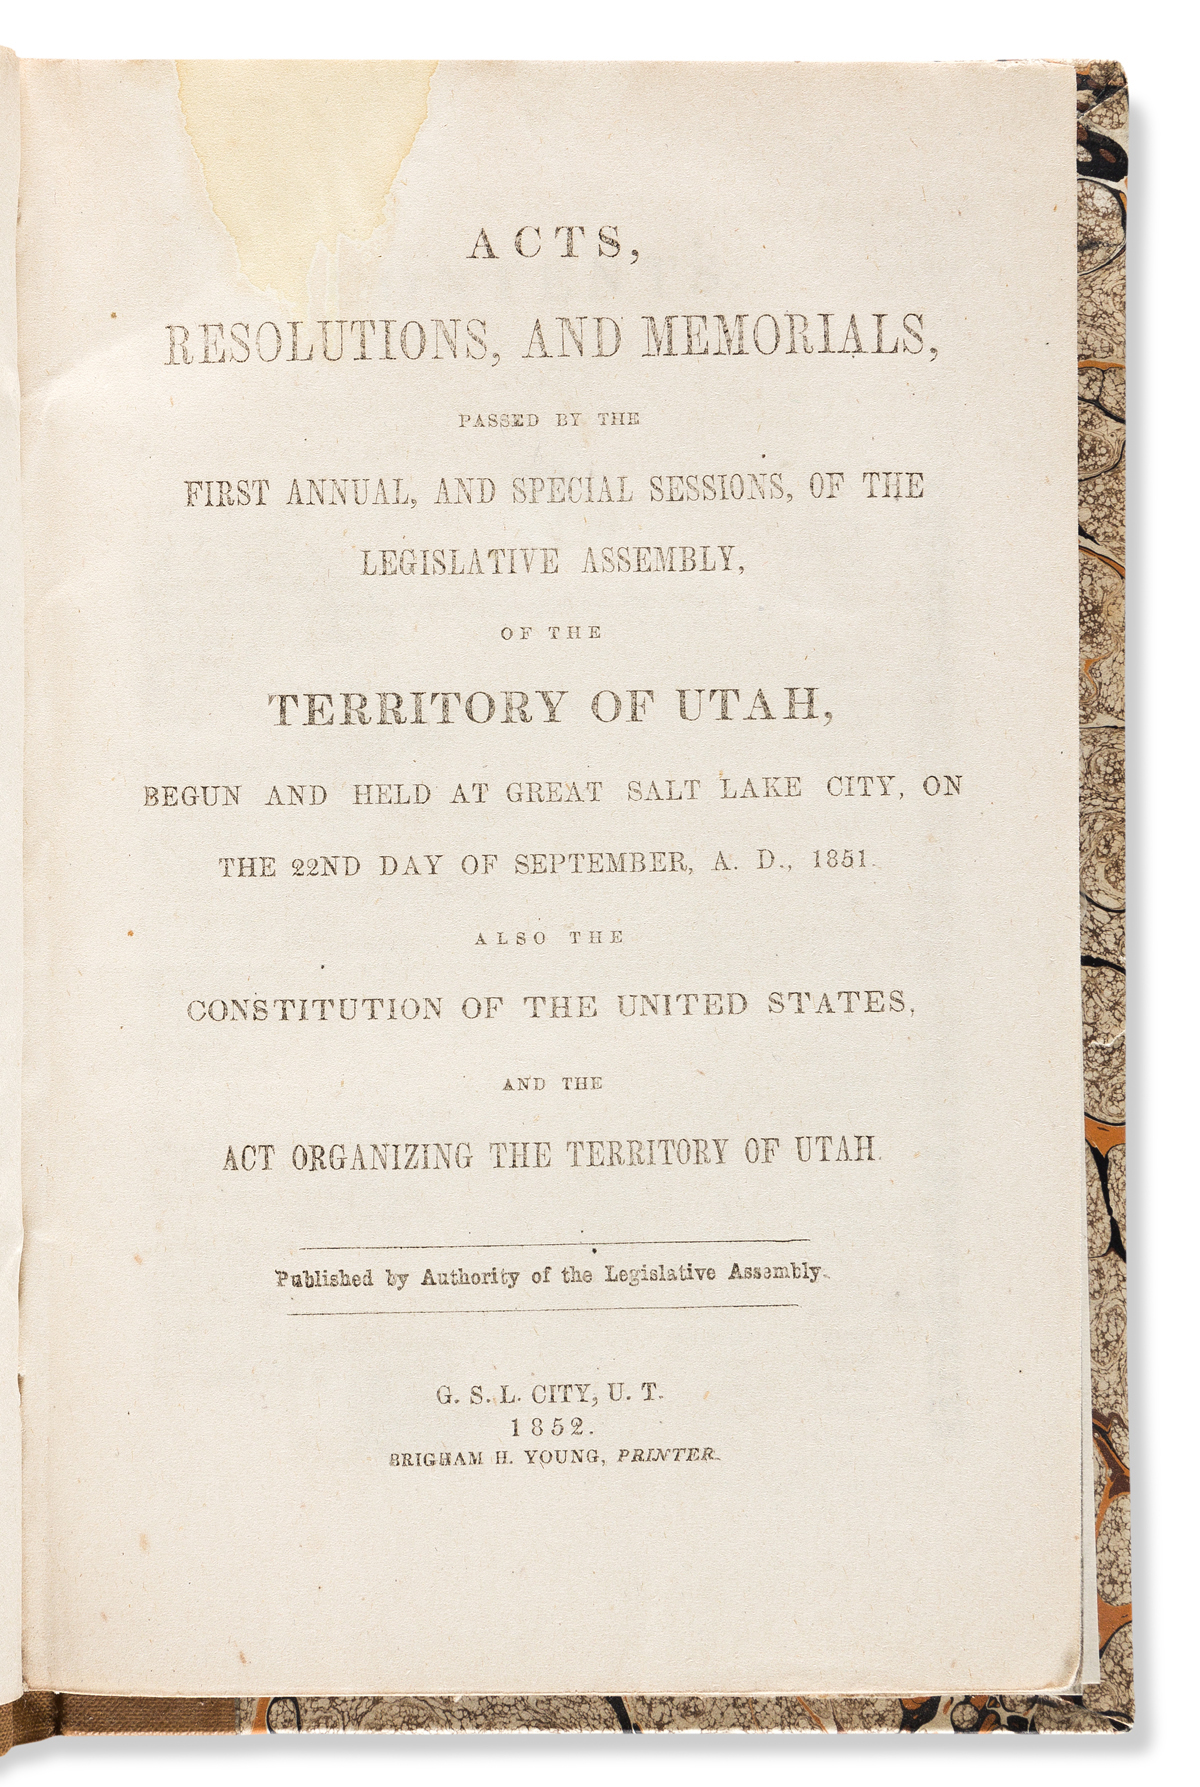 (MORMONS.) Acts, Resolutions, and Memorials, passed by the First Annual . . . Legislative Assembly, of the Territory of Utah.